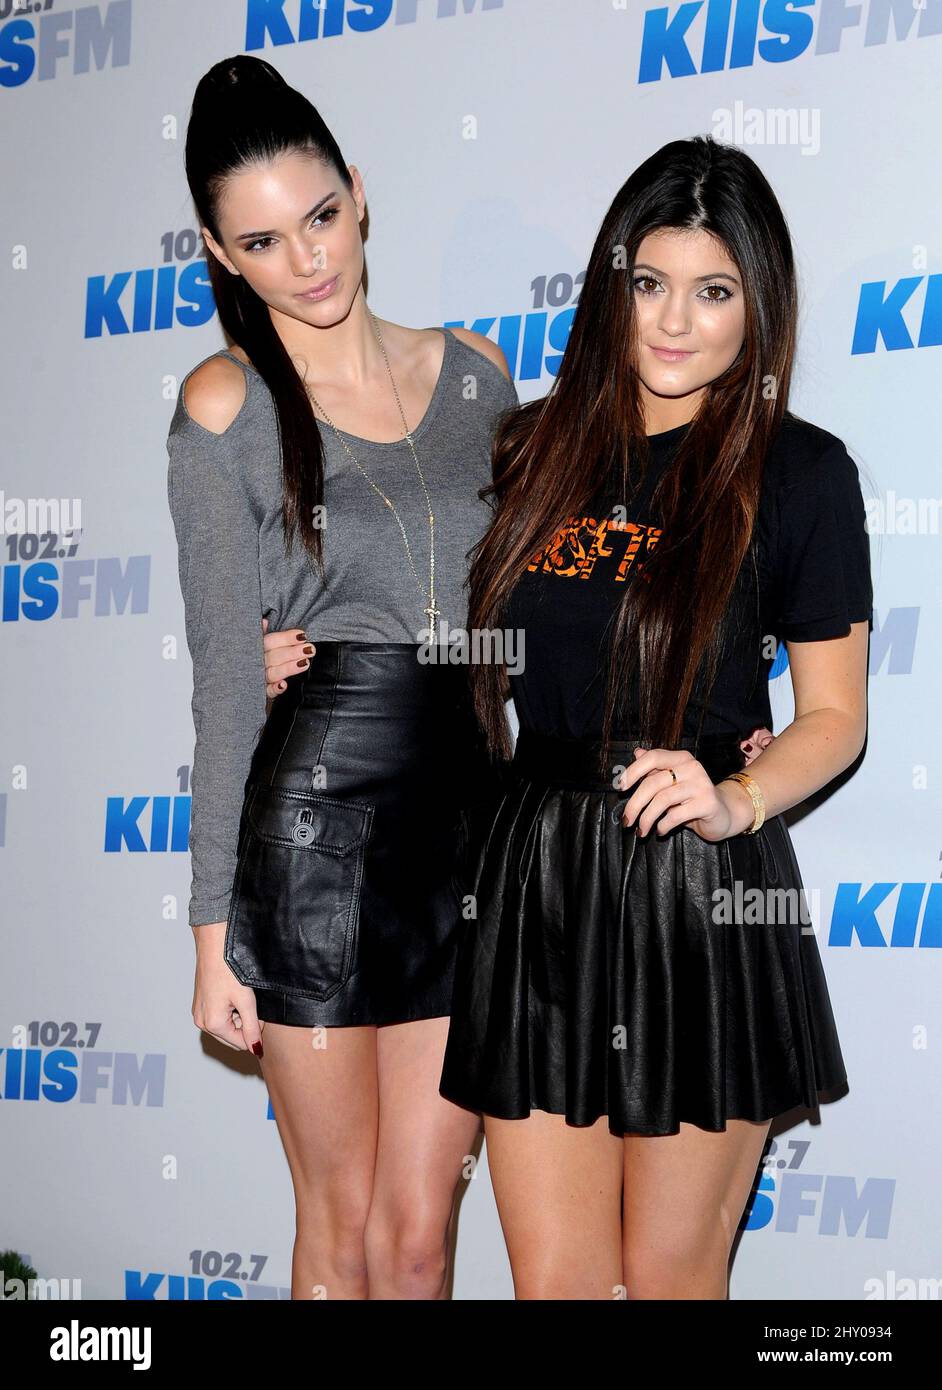 Kendall Jenner and Kylie Jenner attending the 2012 KIIS FM 'Jingle Ball' Night 2 held at the Nokia Theatre in Los Angeles, USA. Stock Photo